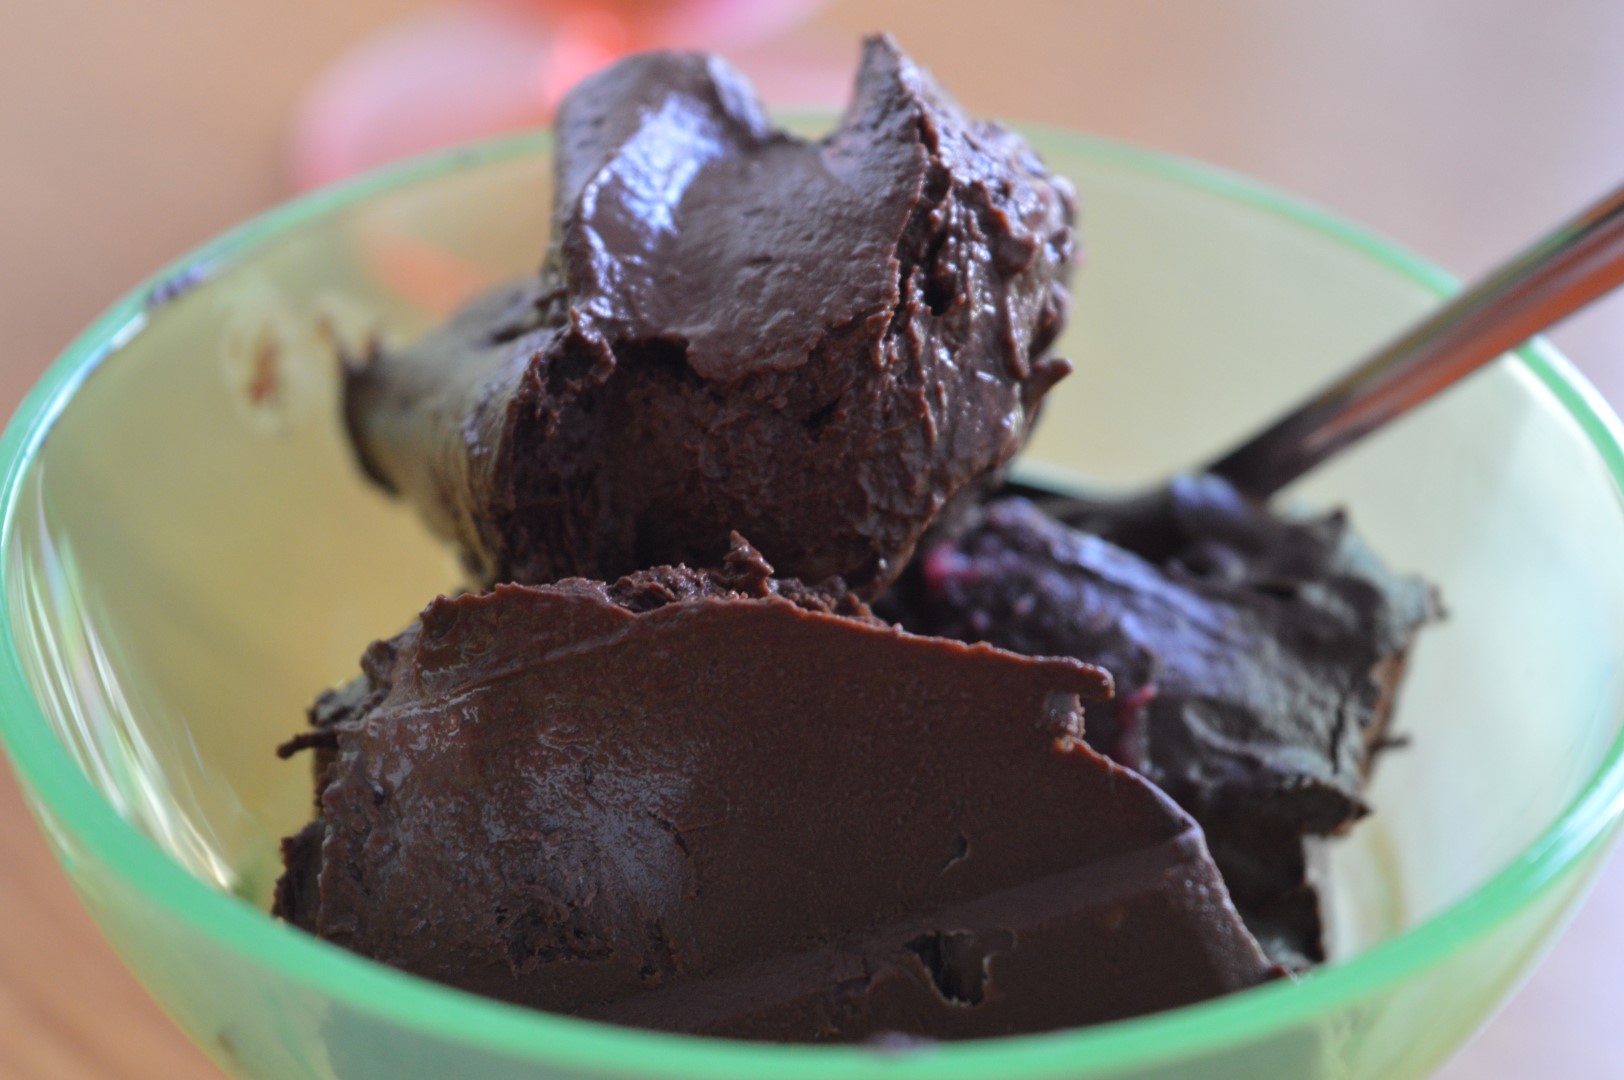 Chocolate ice cream - gluten-free, wheat-free, egg-free, dairy-free. A delicious creamy ice cream that you would never guess is healthy and allergy safe! www.intolerantgourmand.com